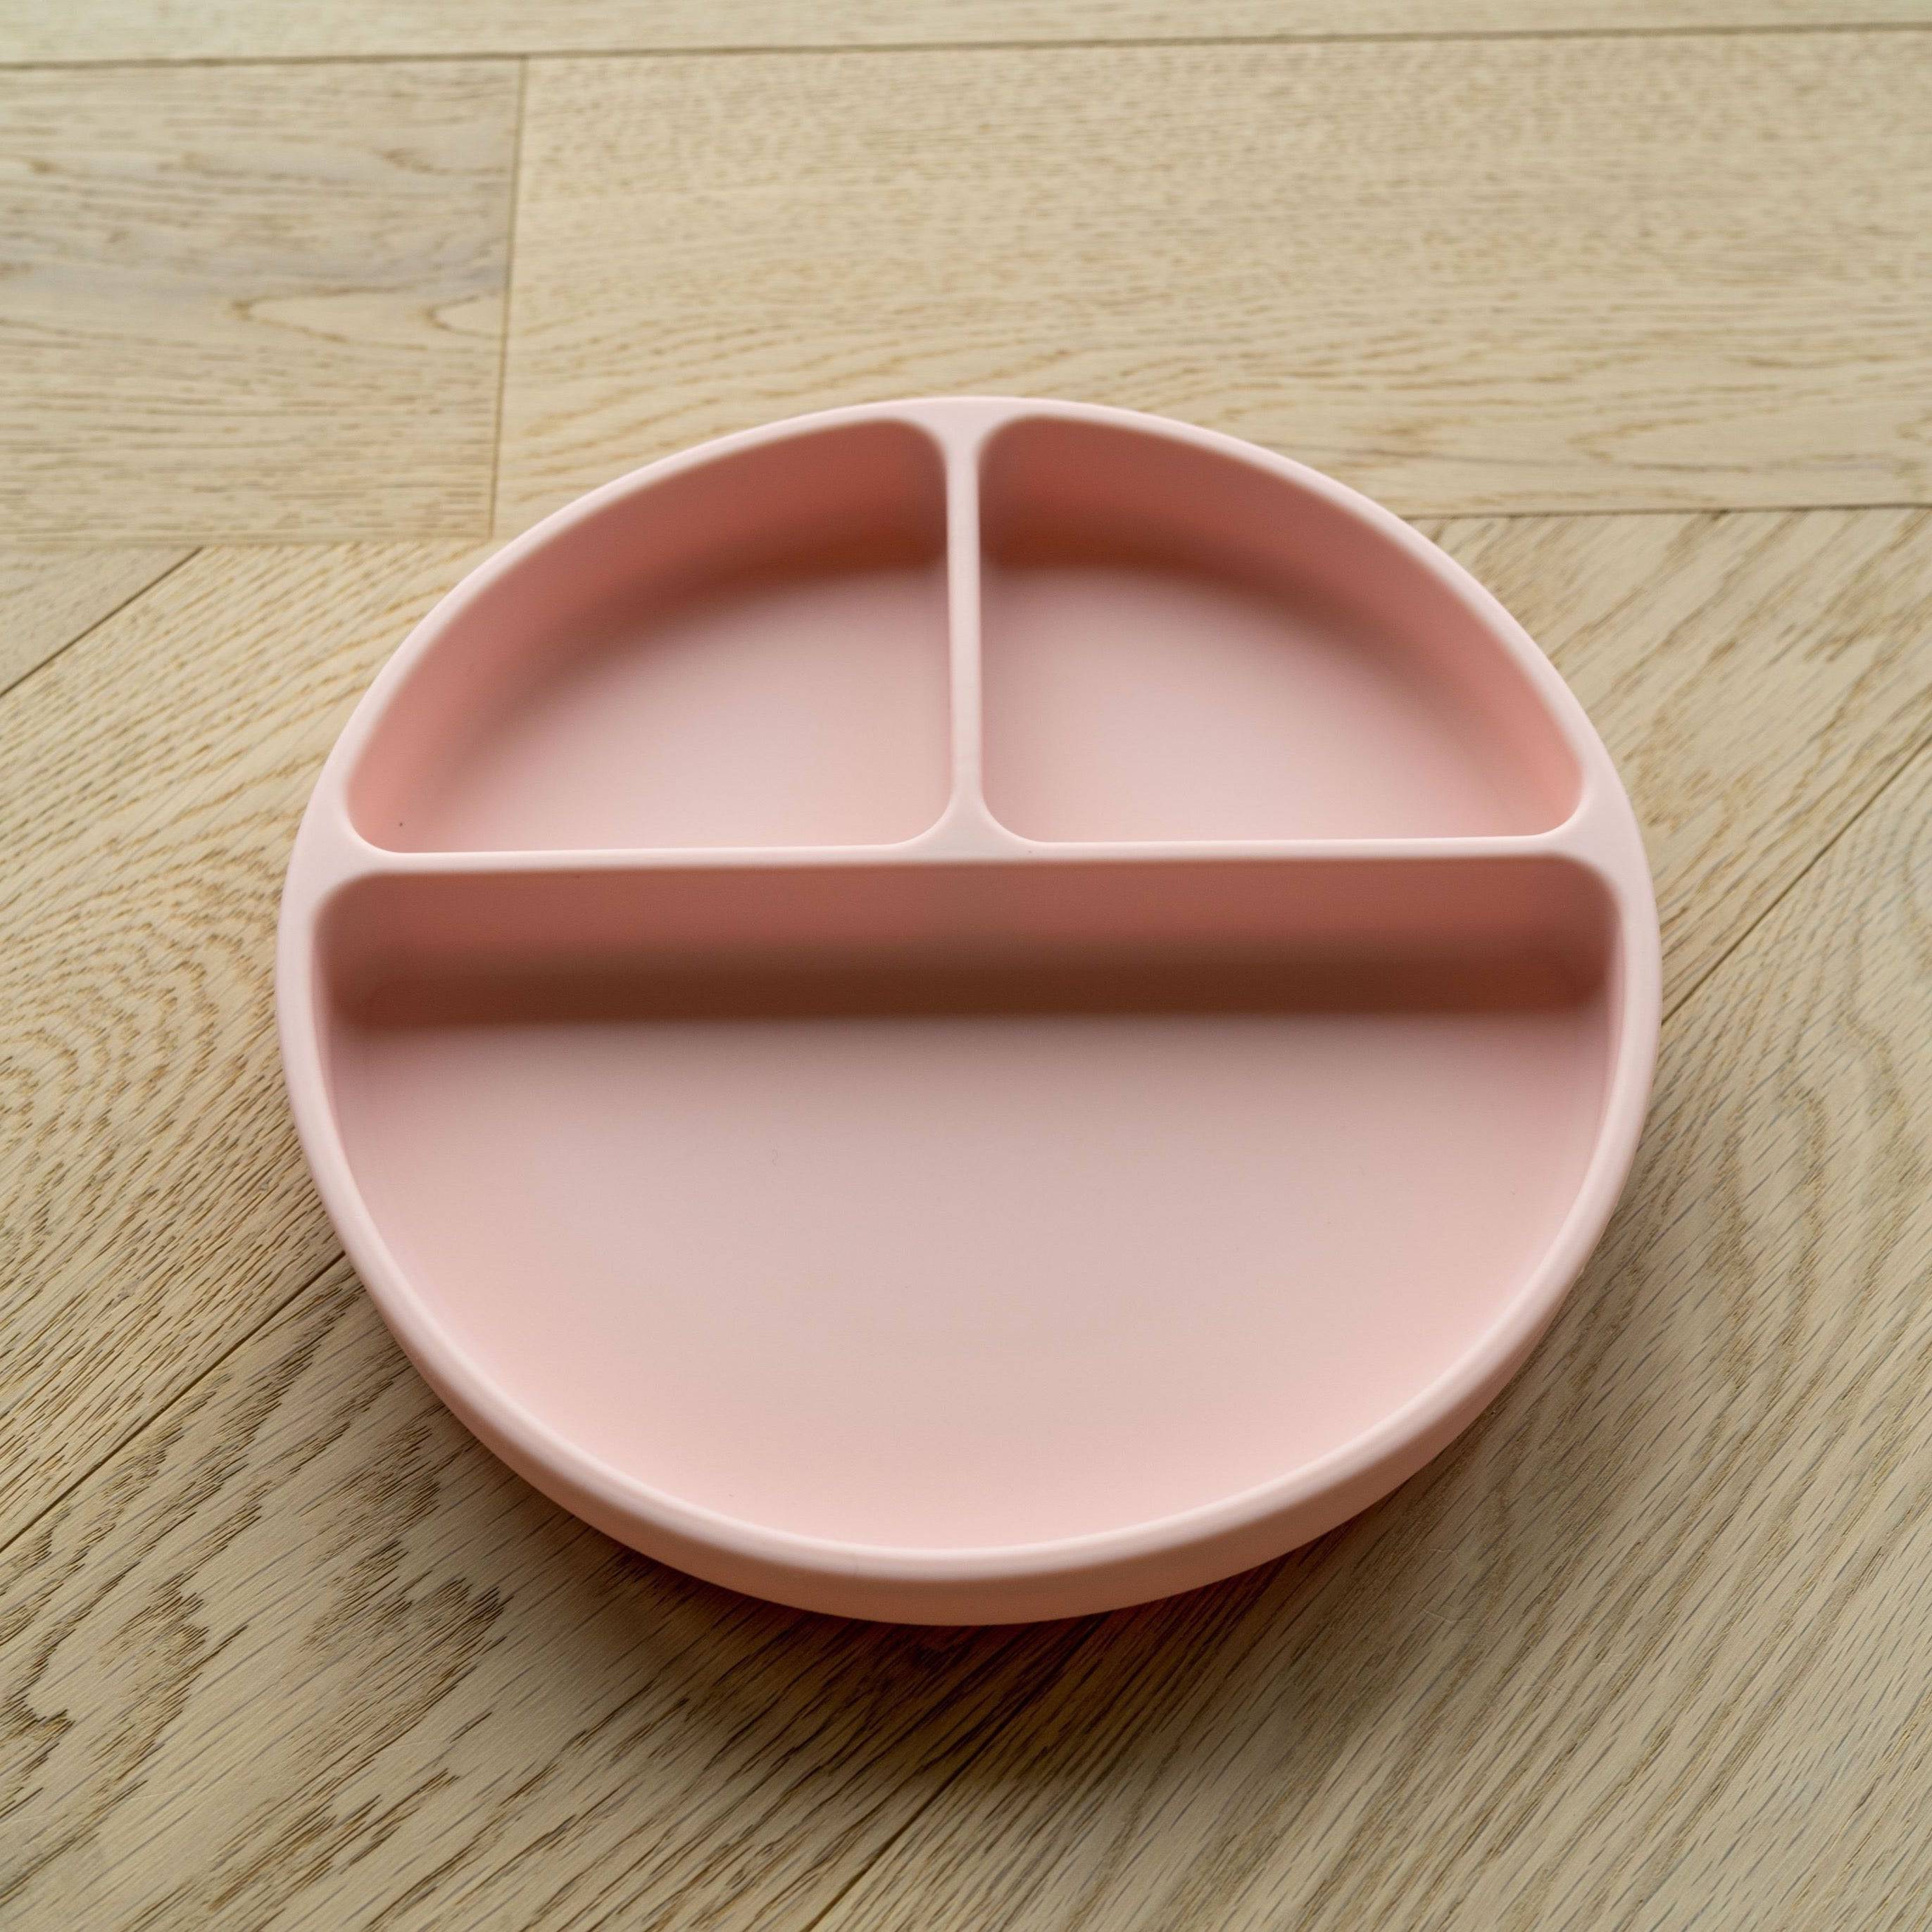 Mabel & Fox - Silicone Tableware - Plate - Pink